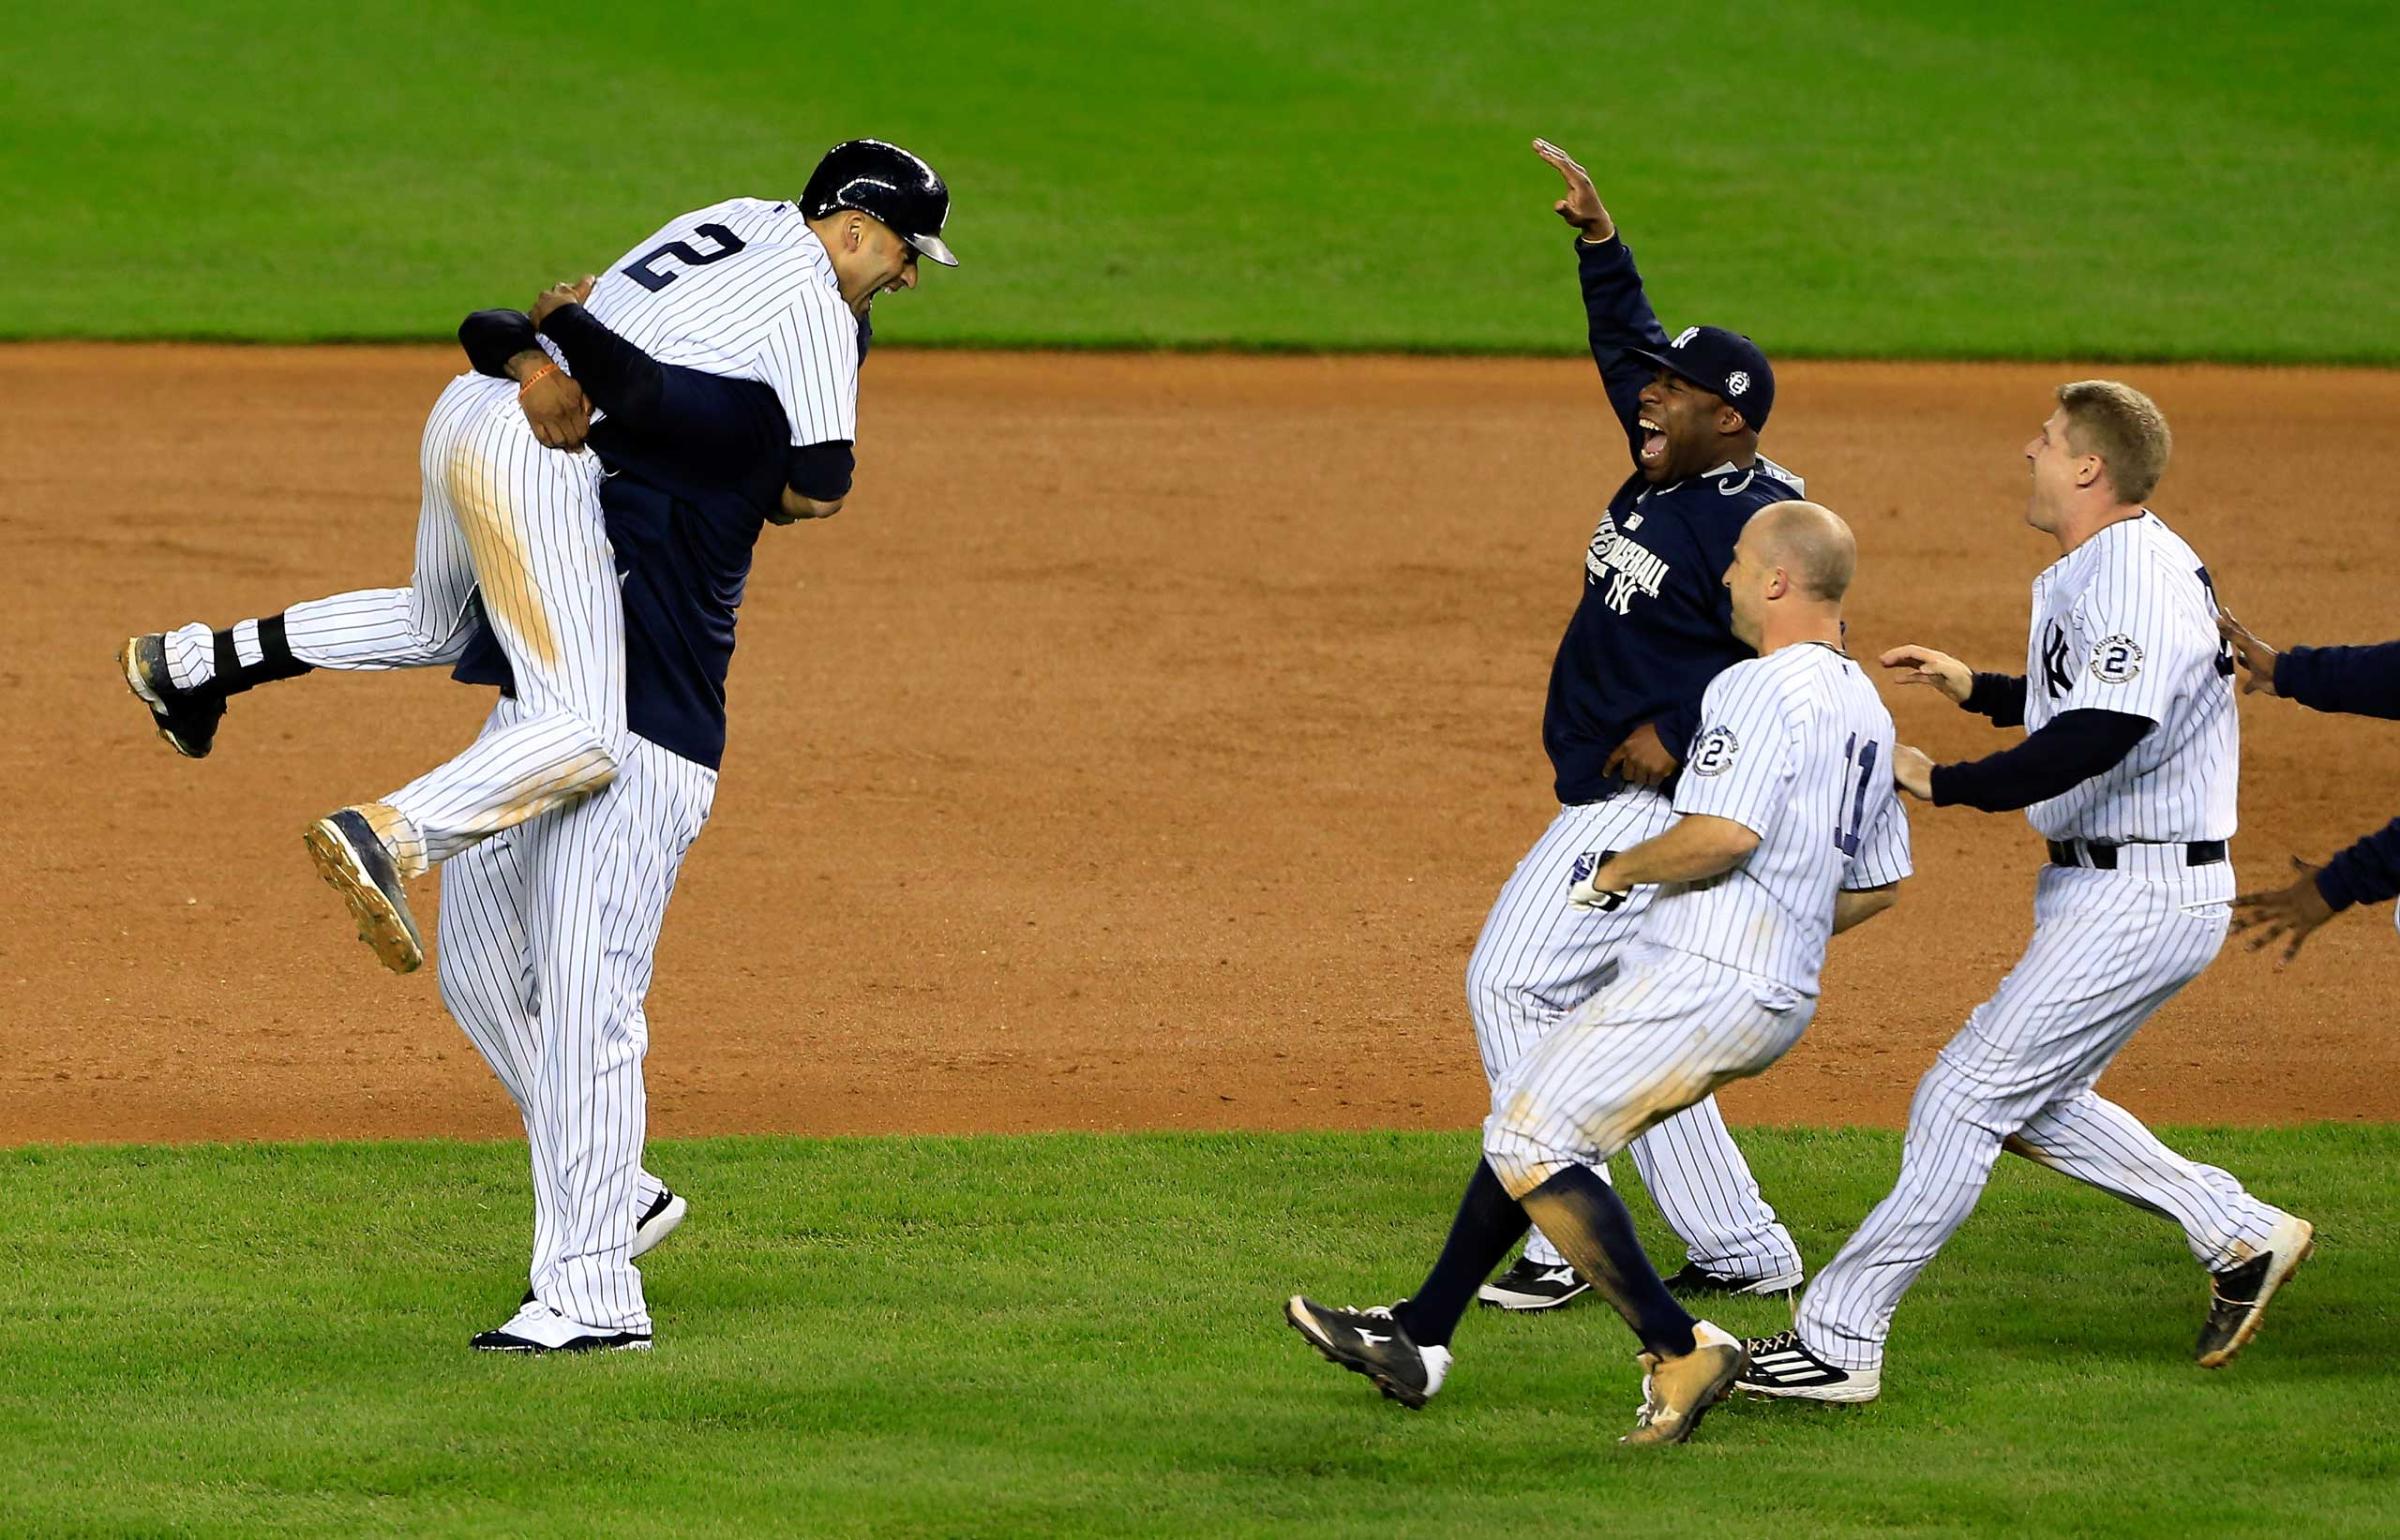 Derek Jeter celebrates with his teammates after a game winning RBI hit in the ninth inning against the Baltimore Orioles in his last game ever at Yankee Stadium on Sept. 25, 2014.